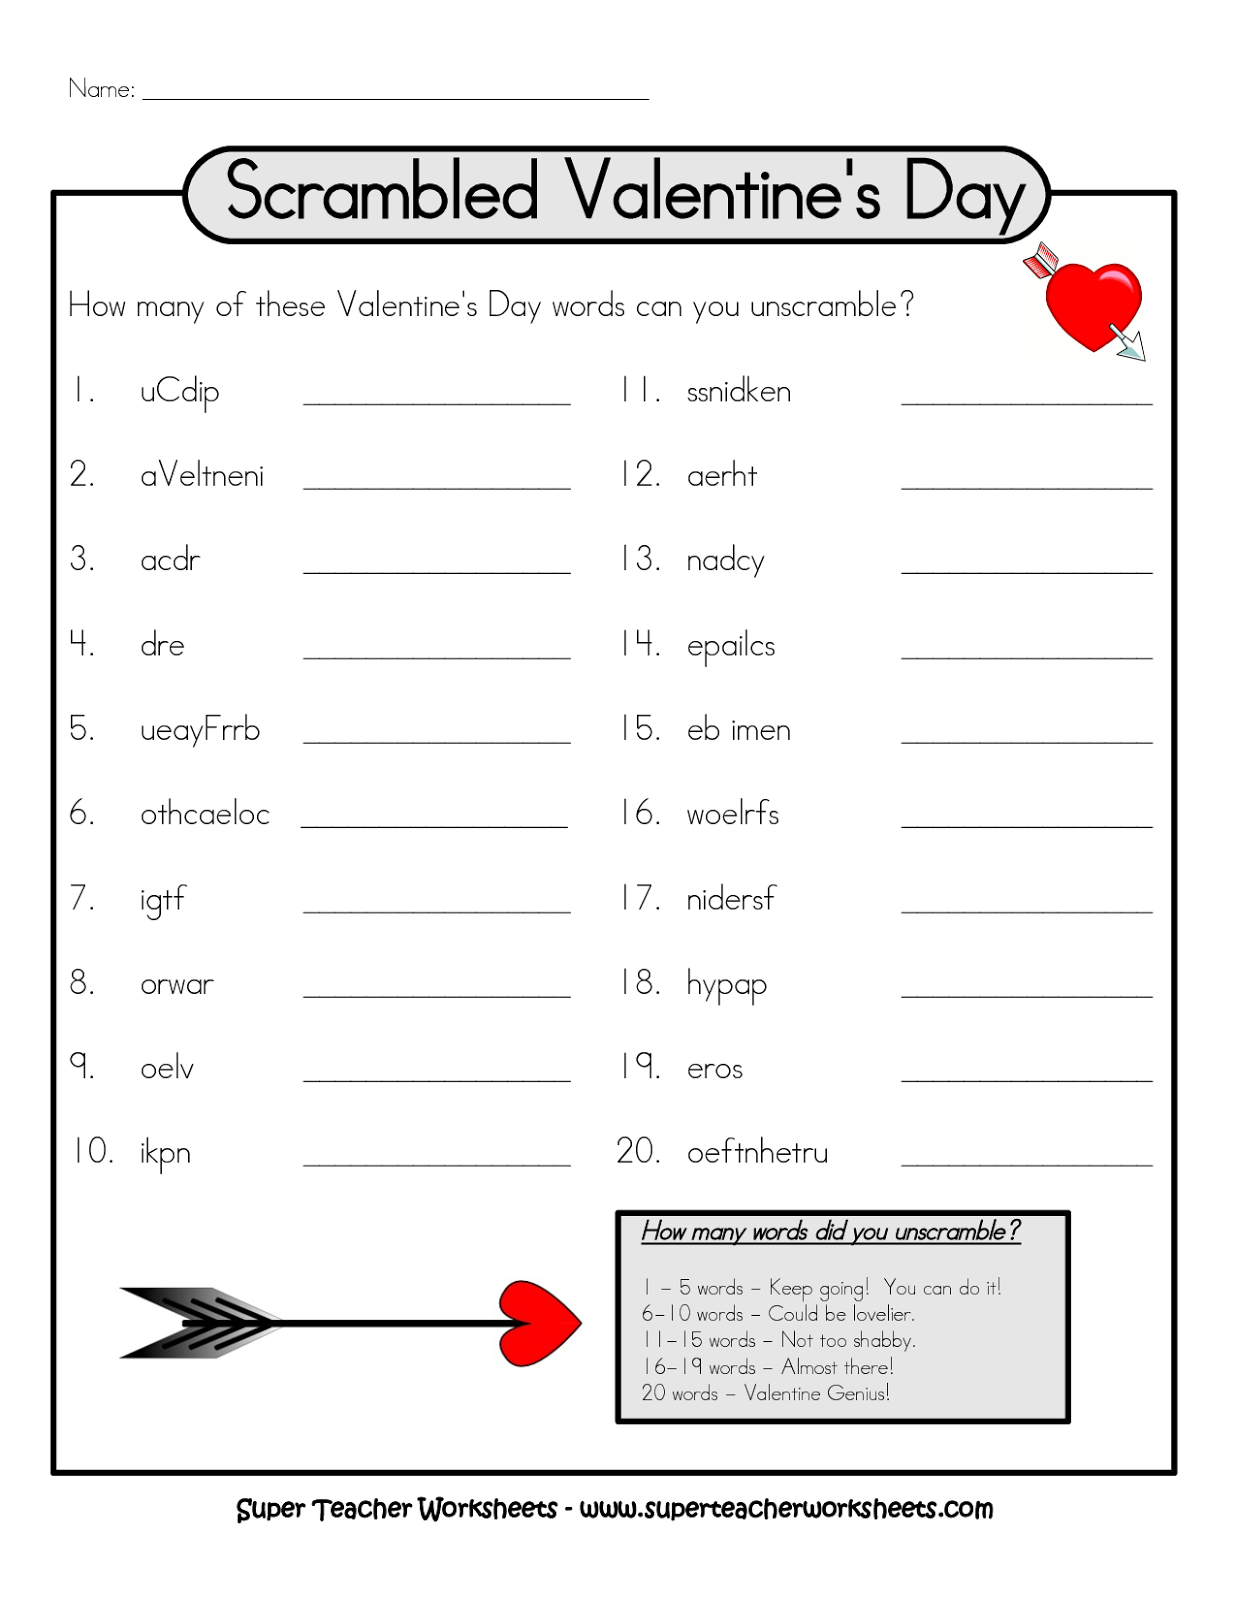 6 Easy Valentine s Day Word Scramble For Kids